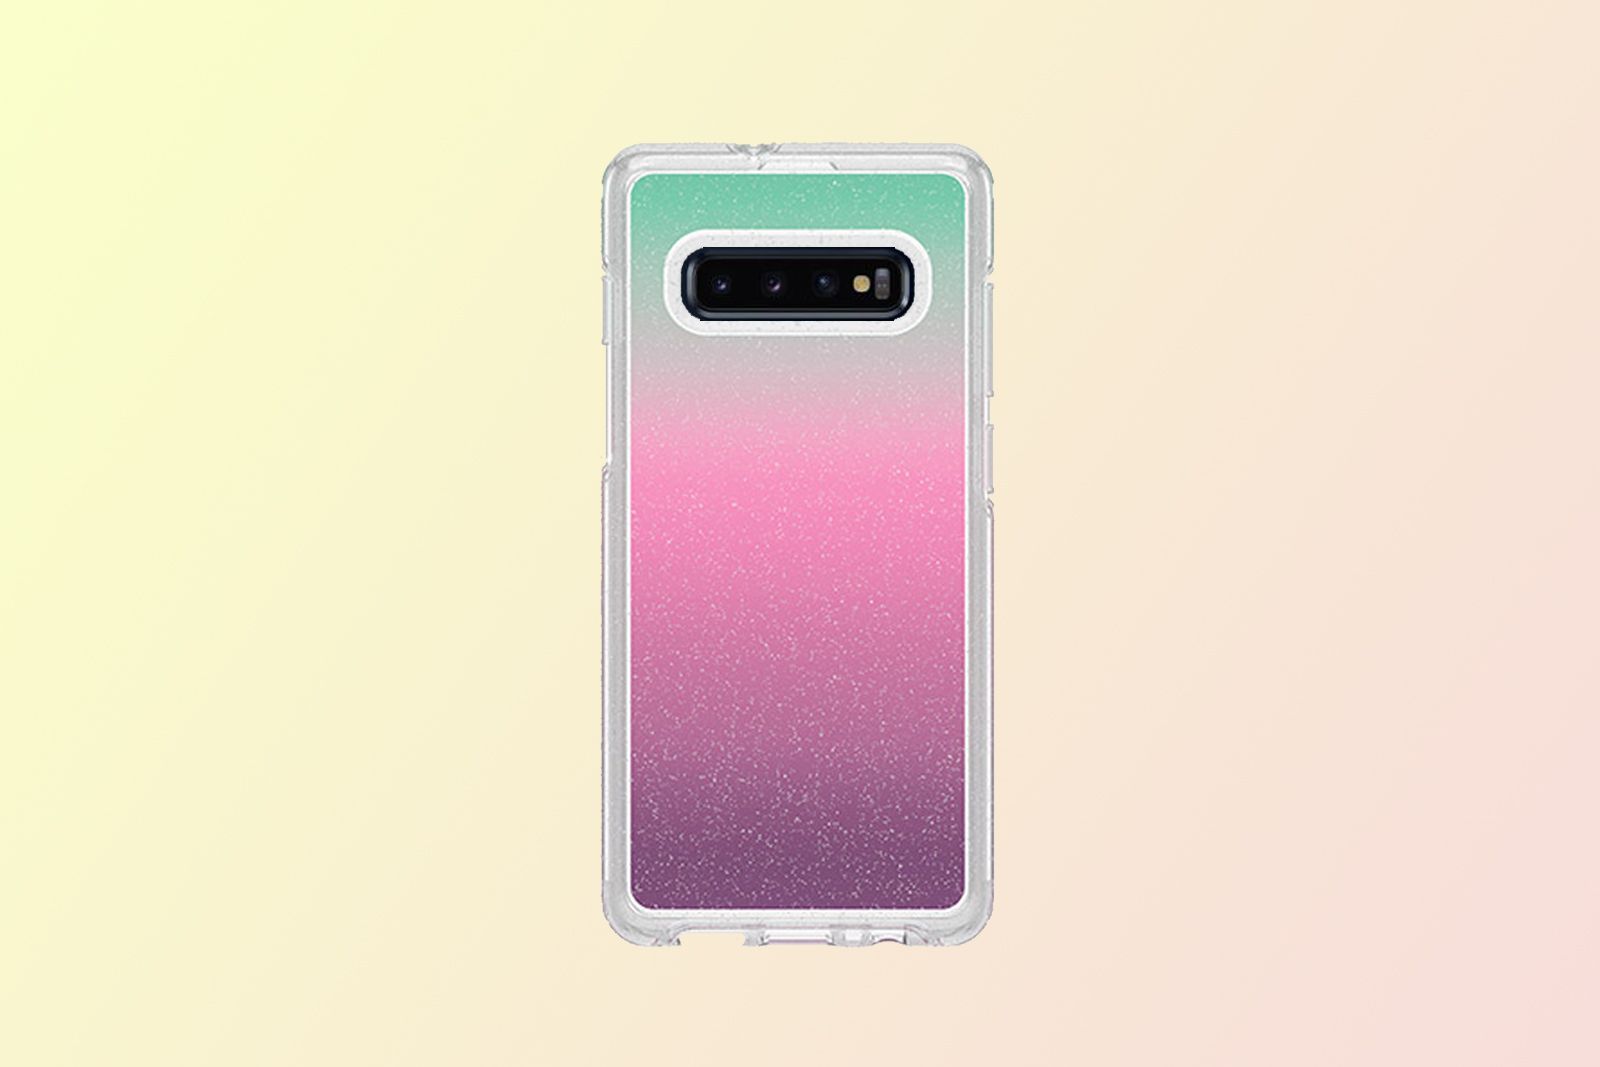 Best Galaxy S10e S10 And S10 Cases Protect Your New Samsung Device image 14